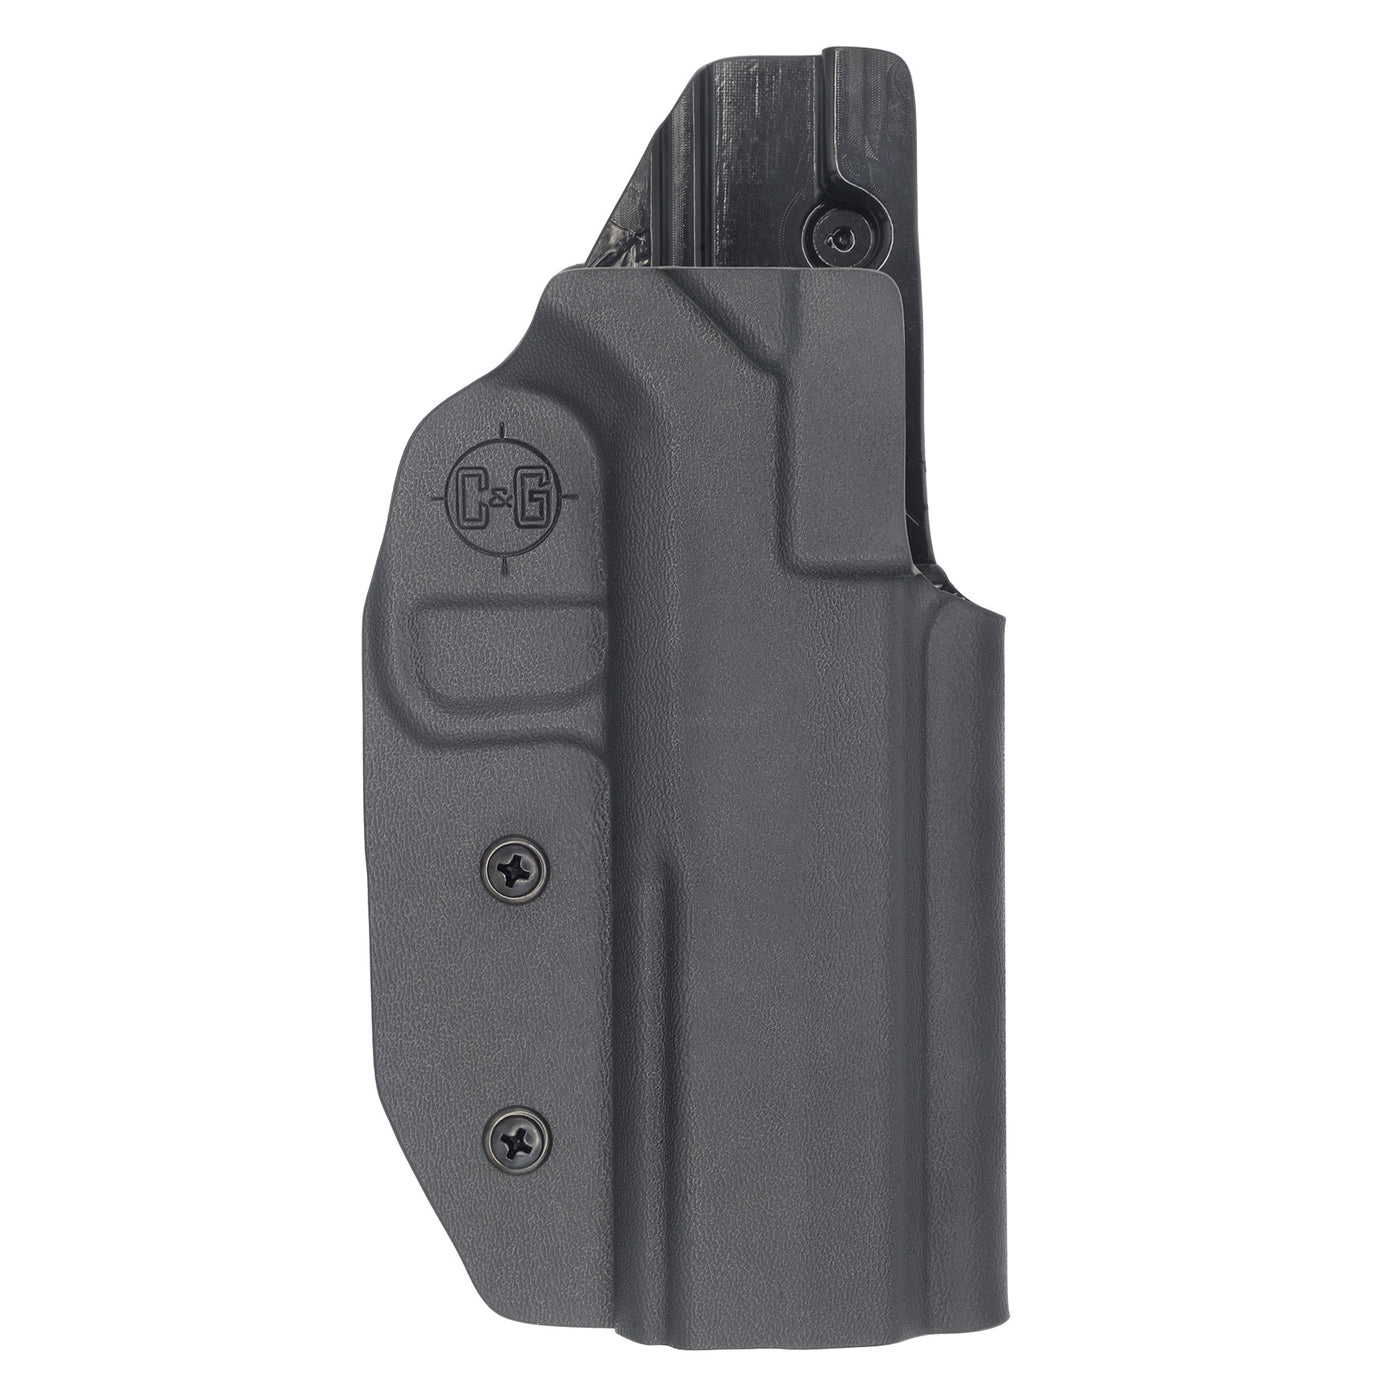 Buy Custom Holsters And More